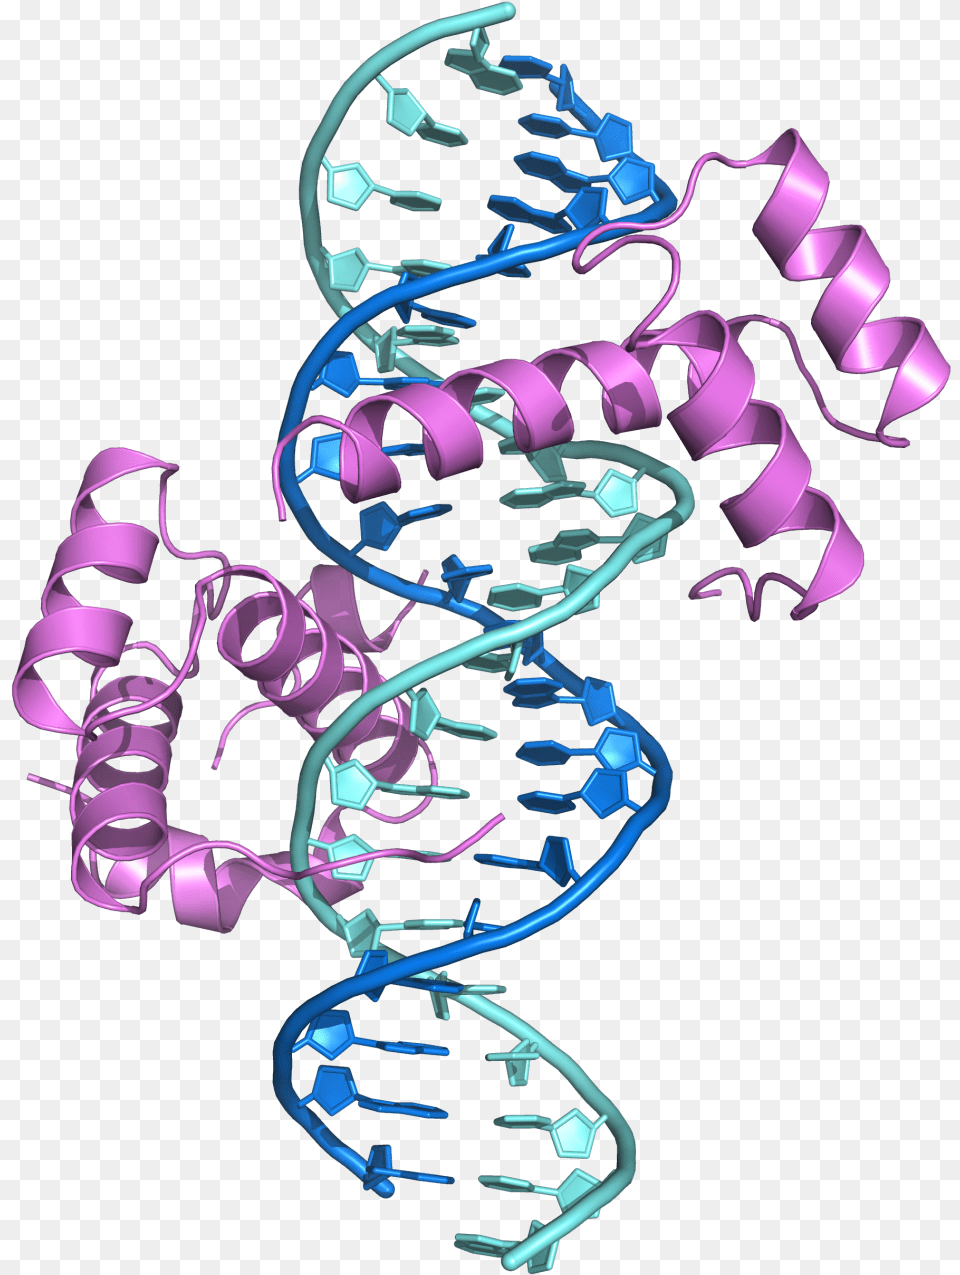 Protein Binding To Dna, Purple, Art, Graphics, Spiral Png Image